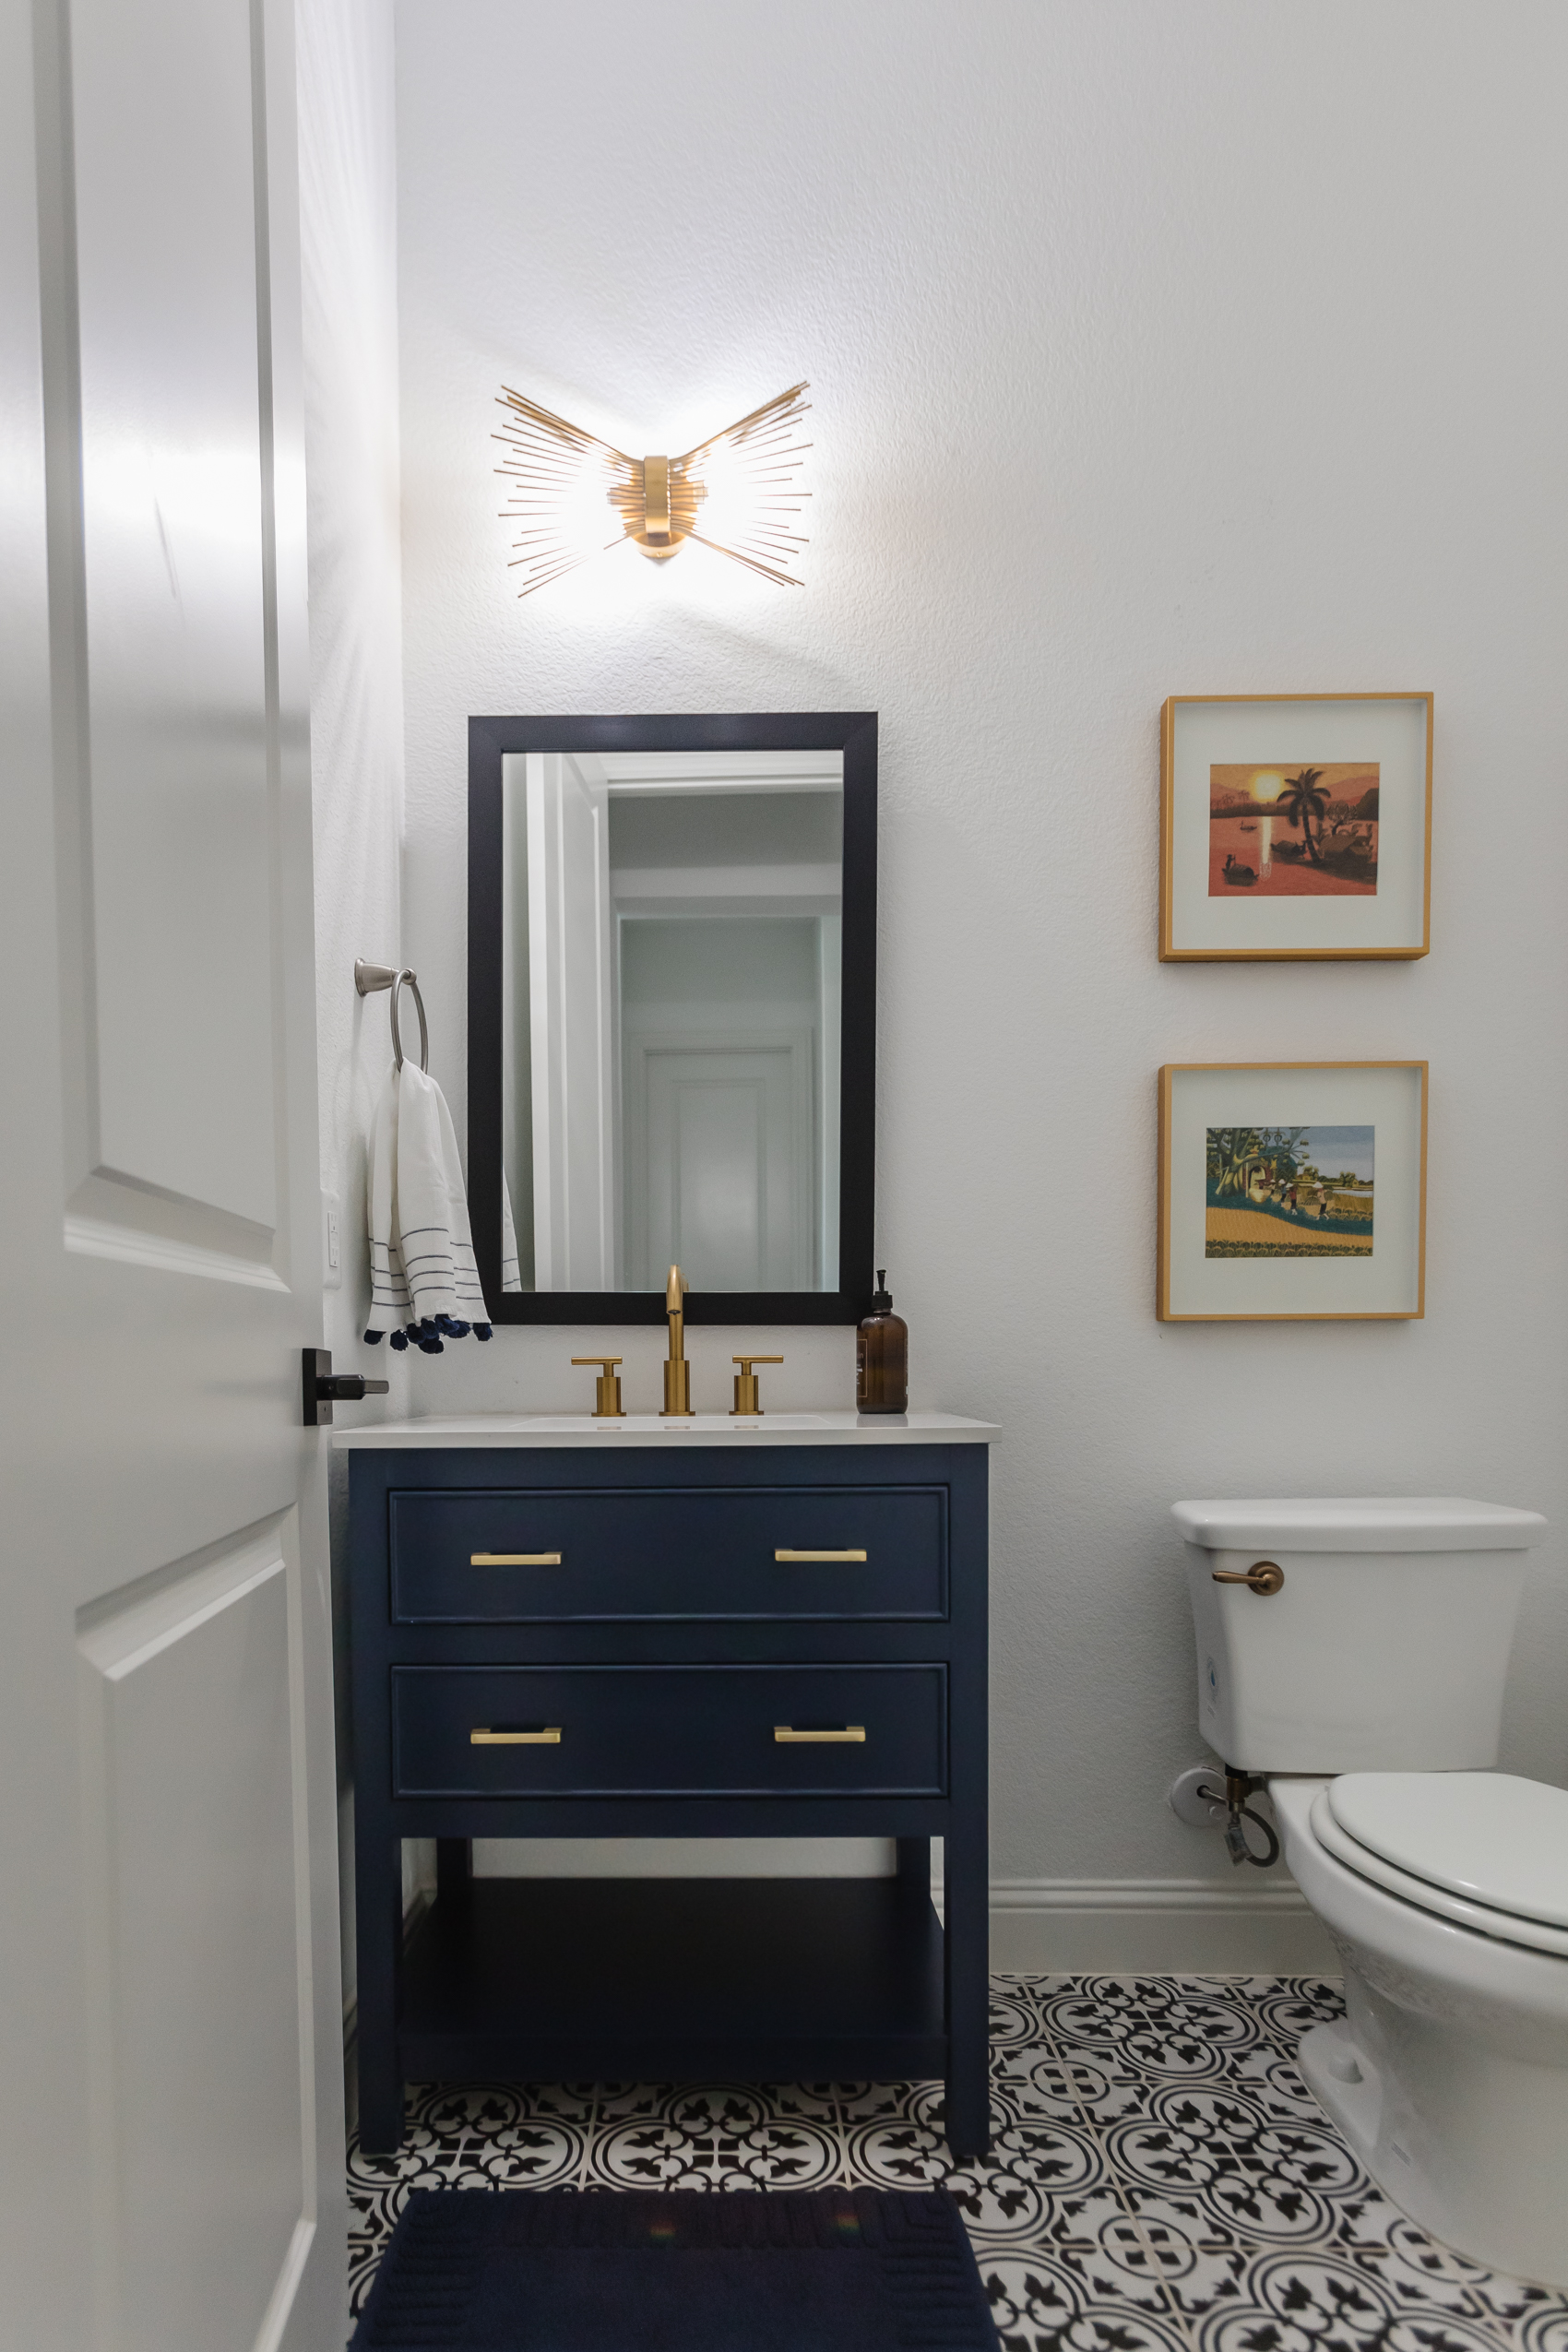 How to build a vanity for a pedestal sink 